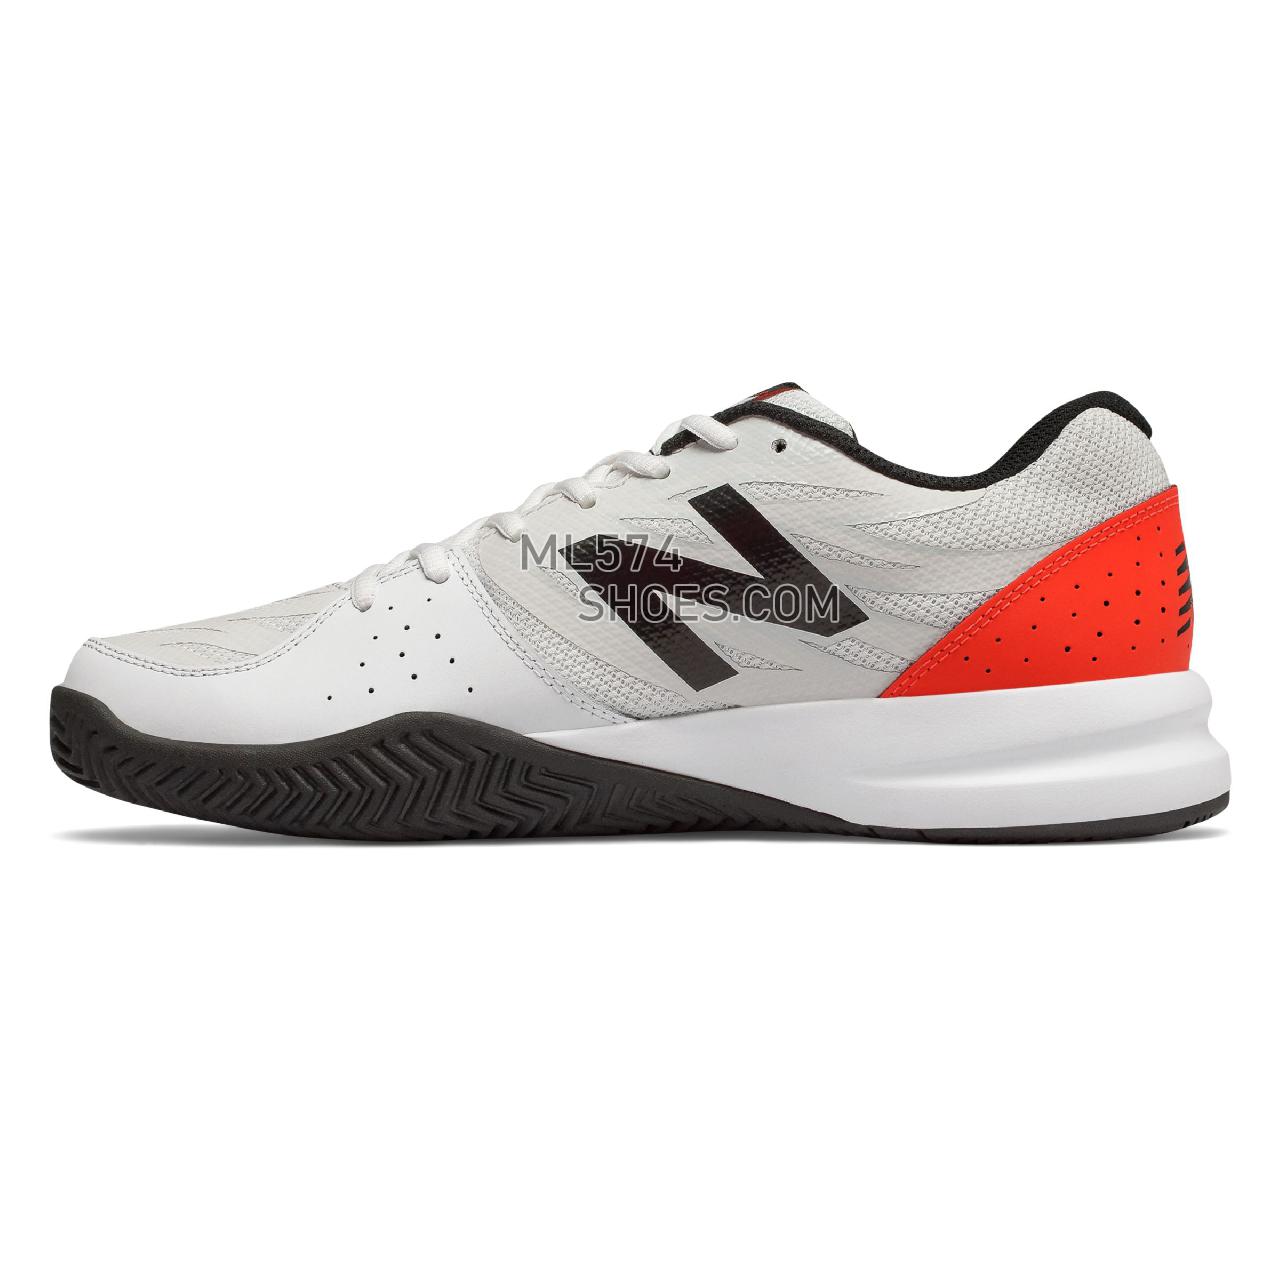 New Balance 786v2 - Men's 786 - Tennis / Court Petrol with Flame - MCH786P2